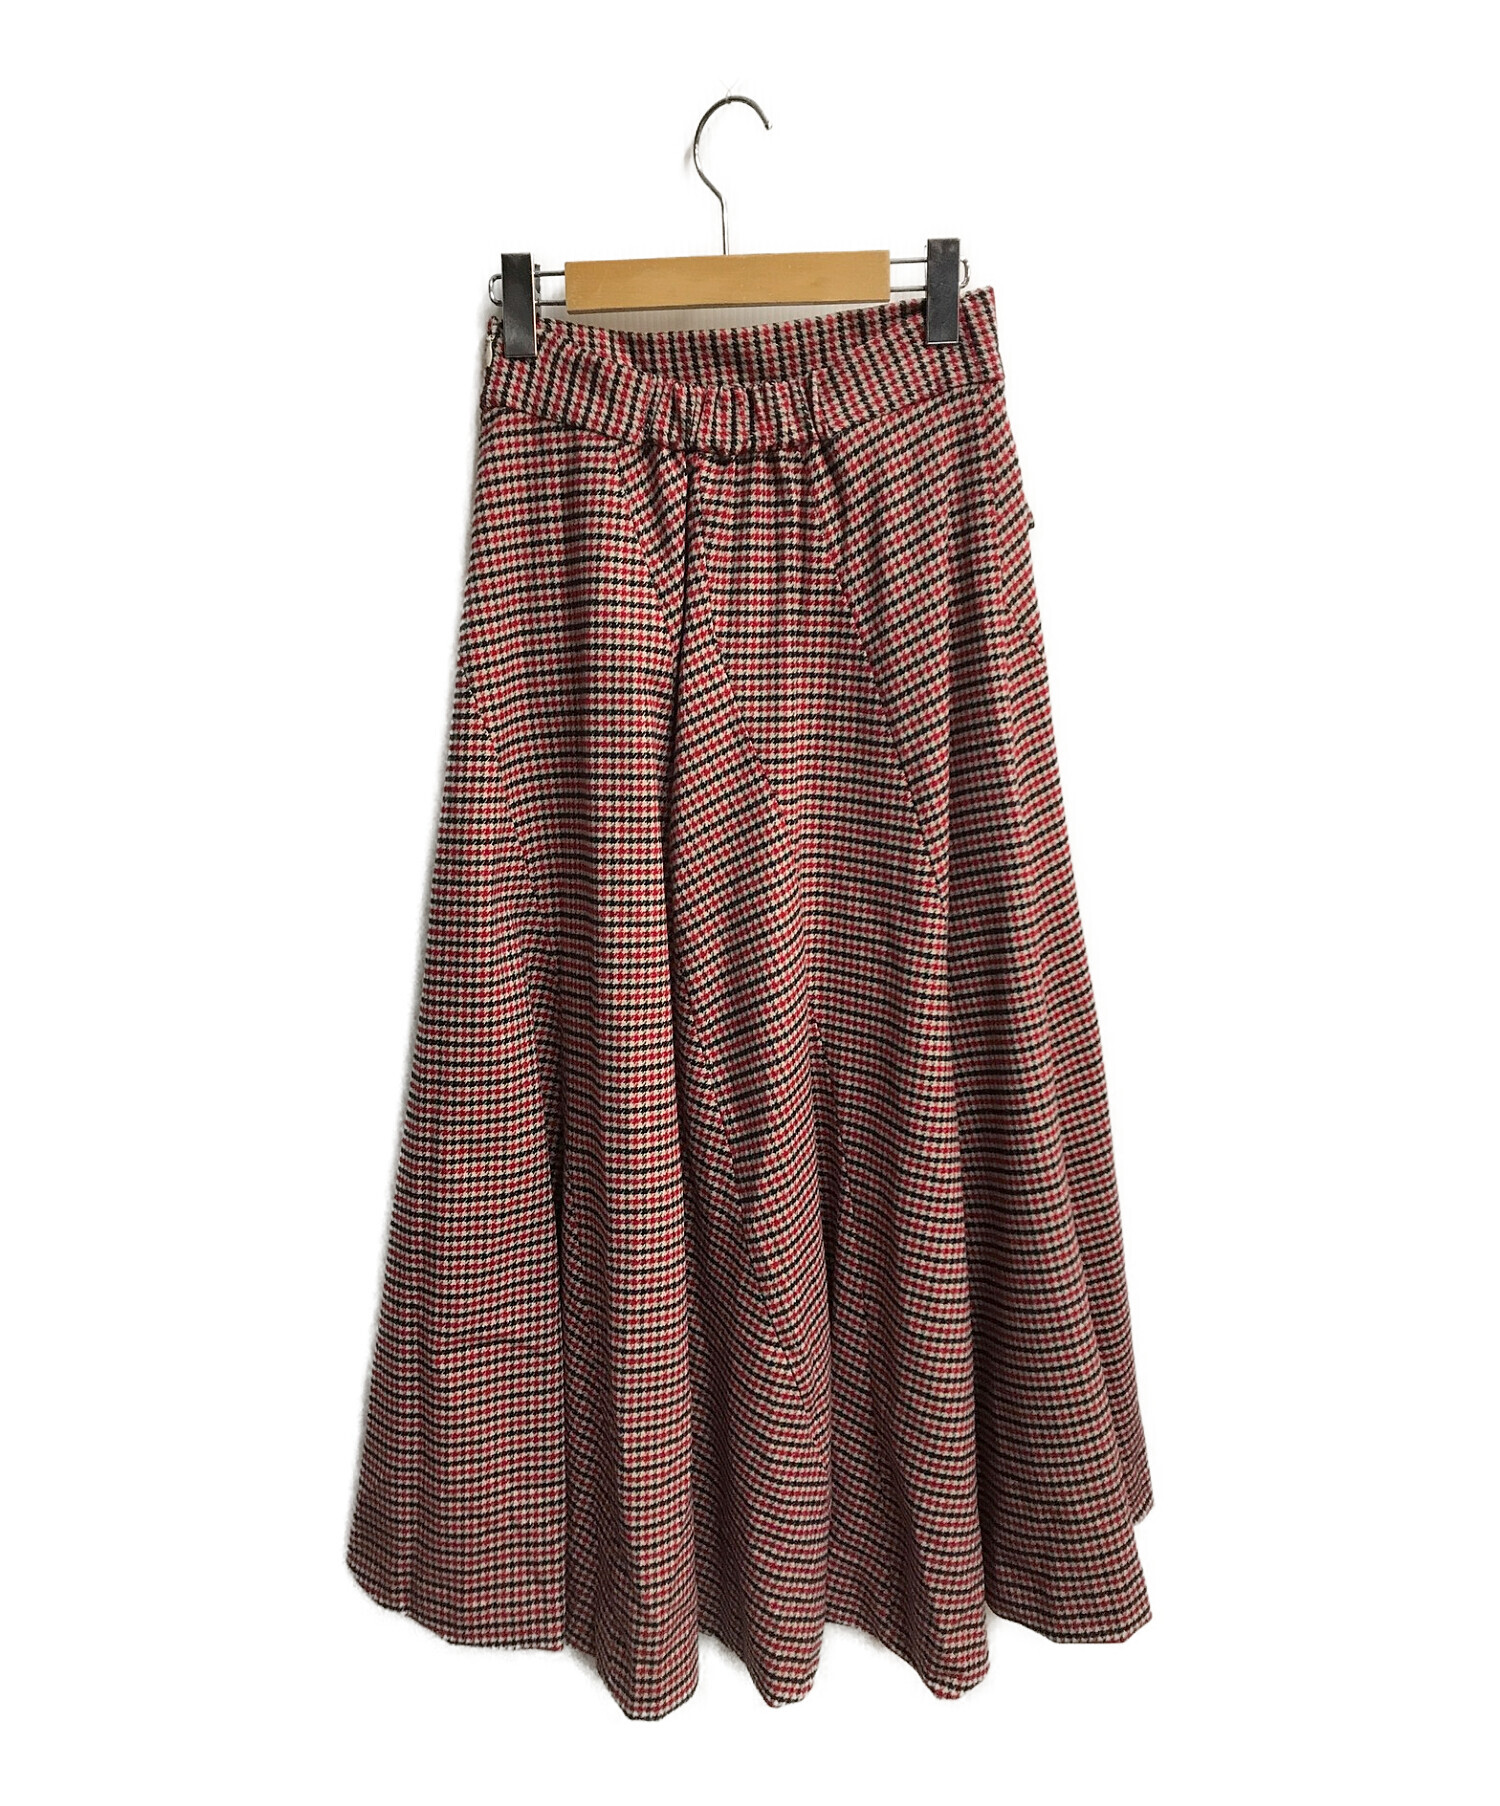 Her lip to High-rise Shell Checked Skirt